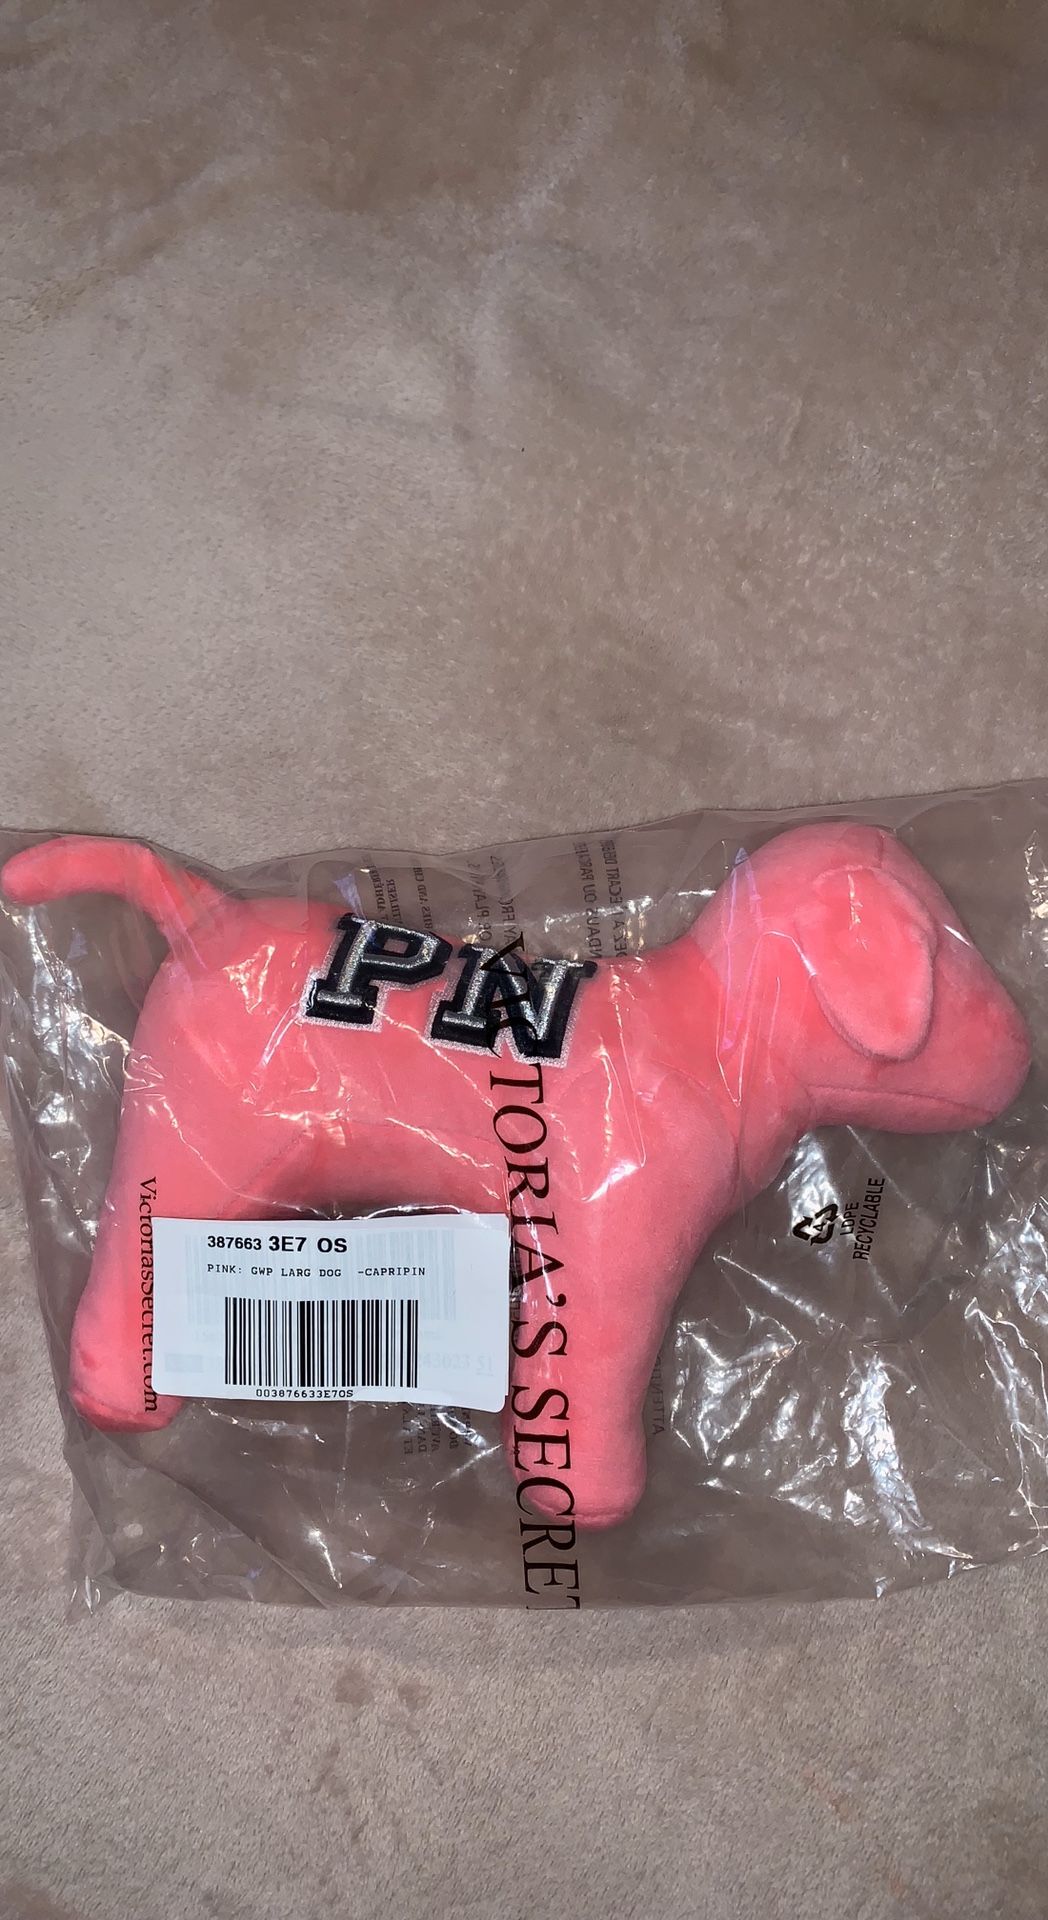 New in package victoria’s secret pink Cute stuffed cozy puppy $15